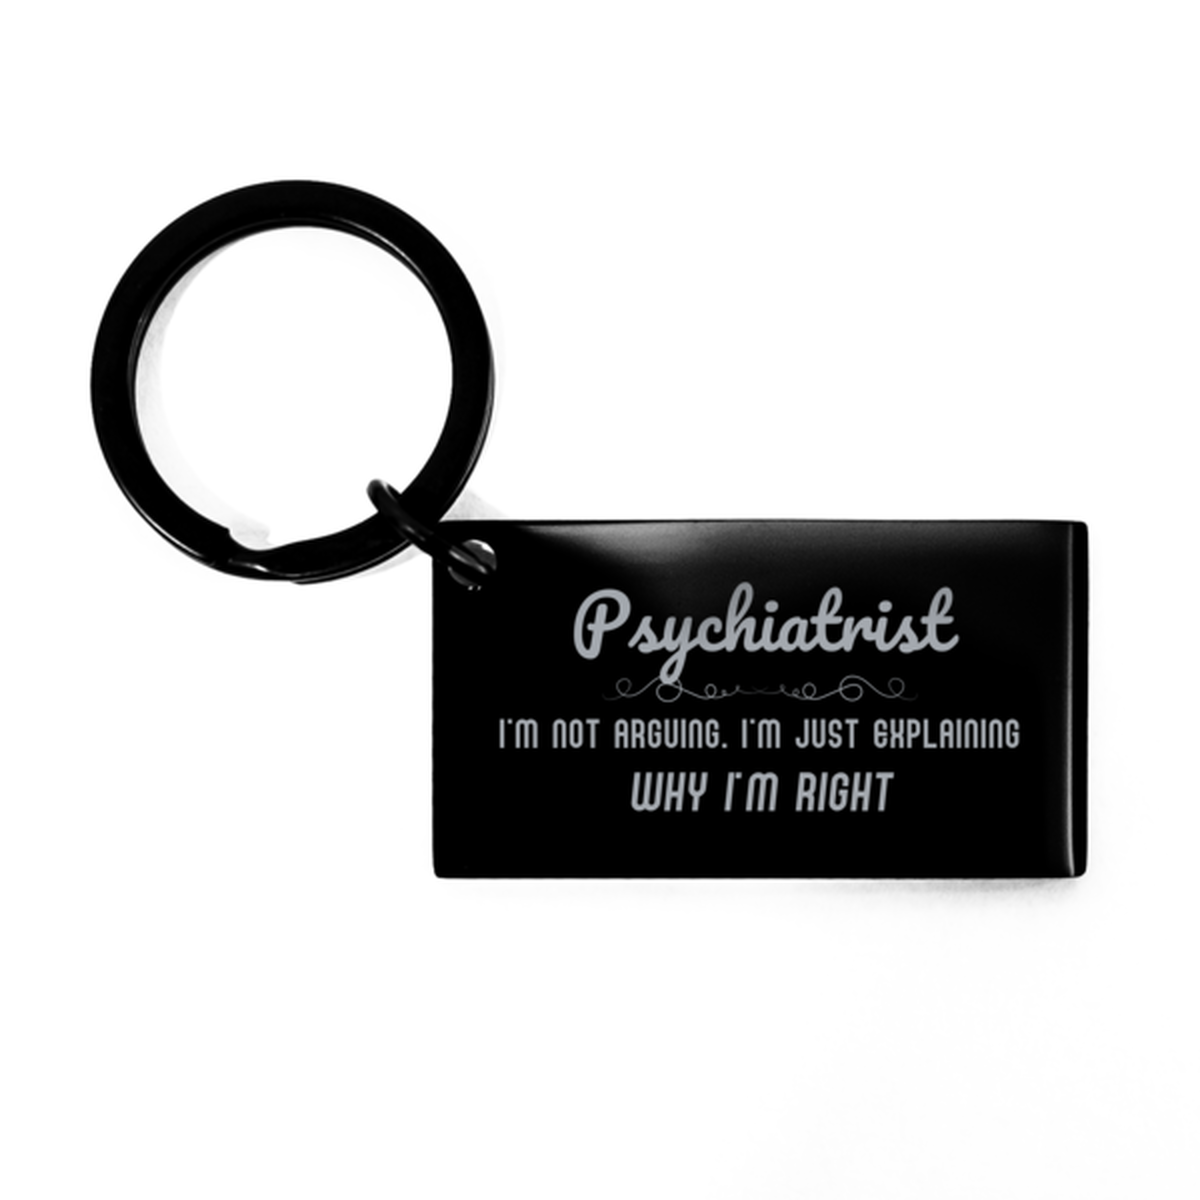 Psychiatrist I'm not Arguing. I'm Just Explaining Why I'm RIGHT Keychain, Funny Saying Quote Psychiatrist Gifts For Psychiatrist Graduation Birthday Christmas Gifts for Men Women Coworker